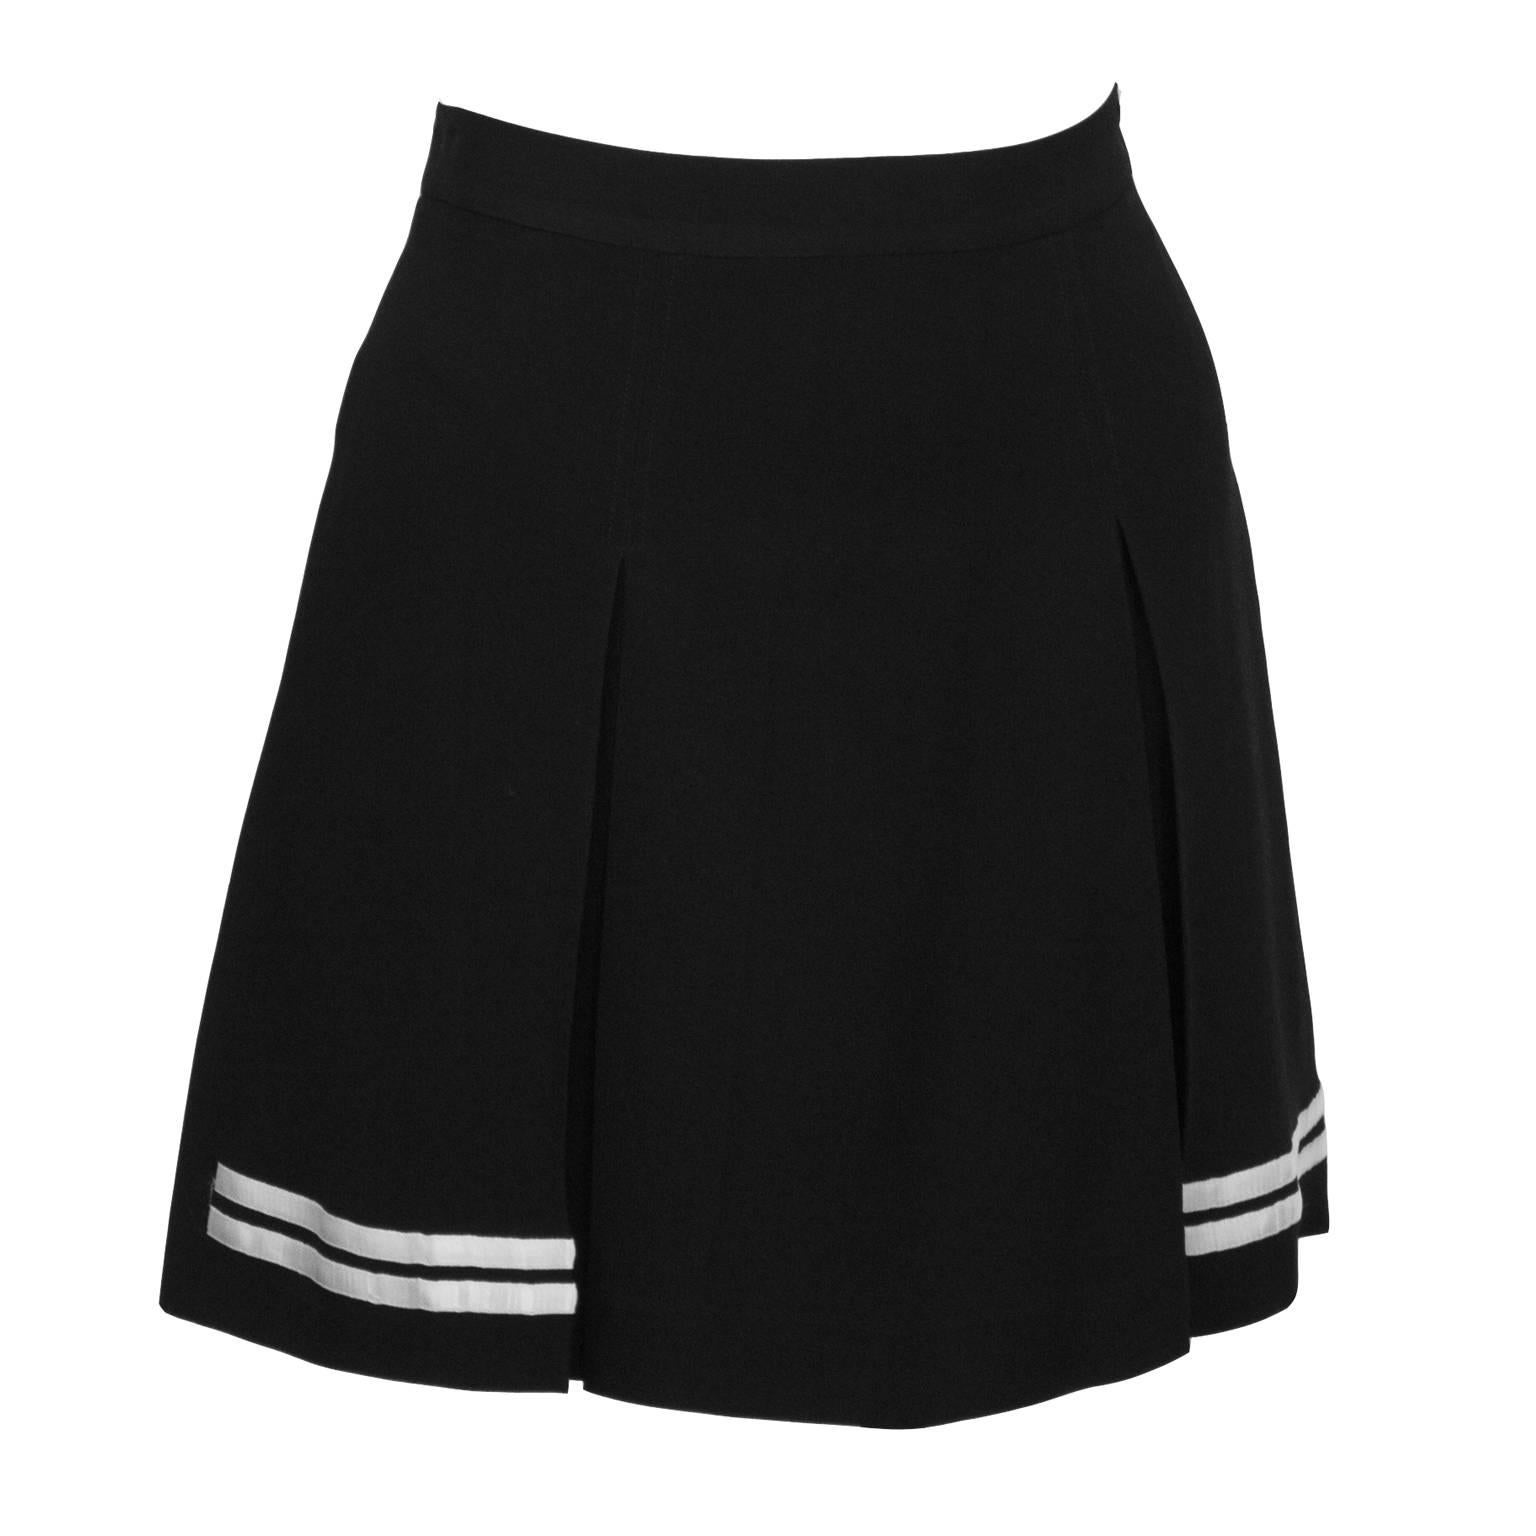 Adorable black Dolce and Gabbana acetate and rayon mini skort with saucy double kick pleat sand white stripe details. Perfect for your early morning walk  or a visit to the beach club. In excellent condition. Fits like a US size 4. Dry cleaned and